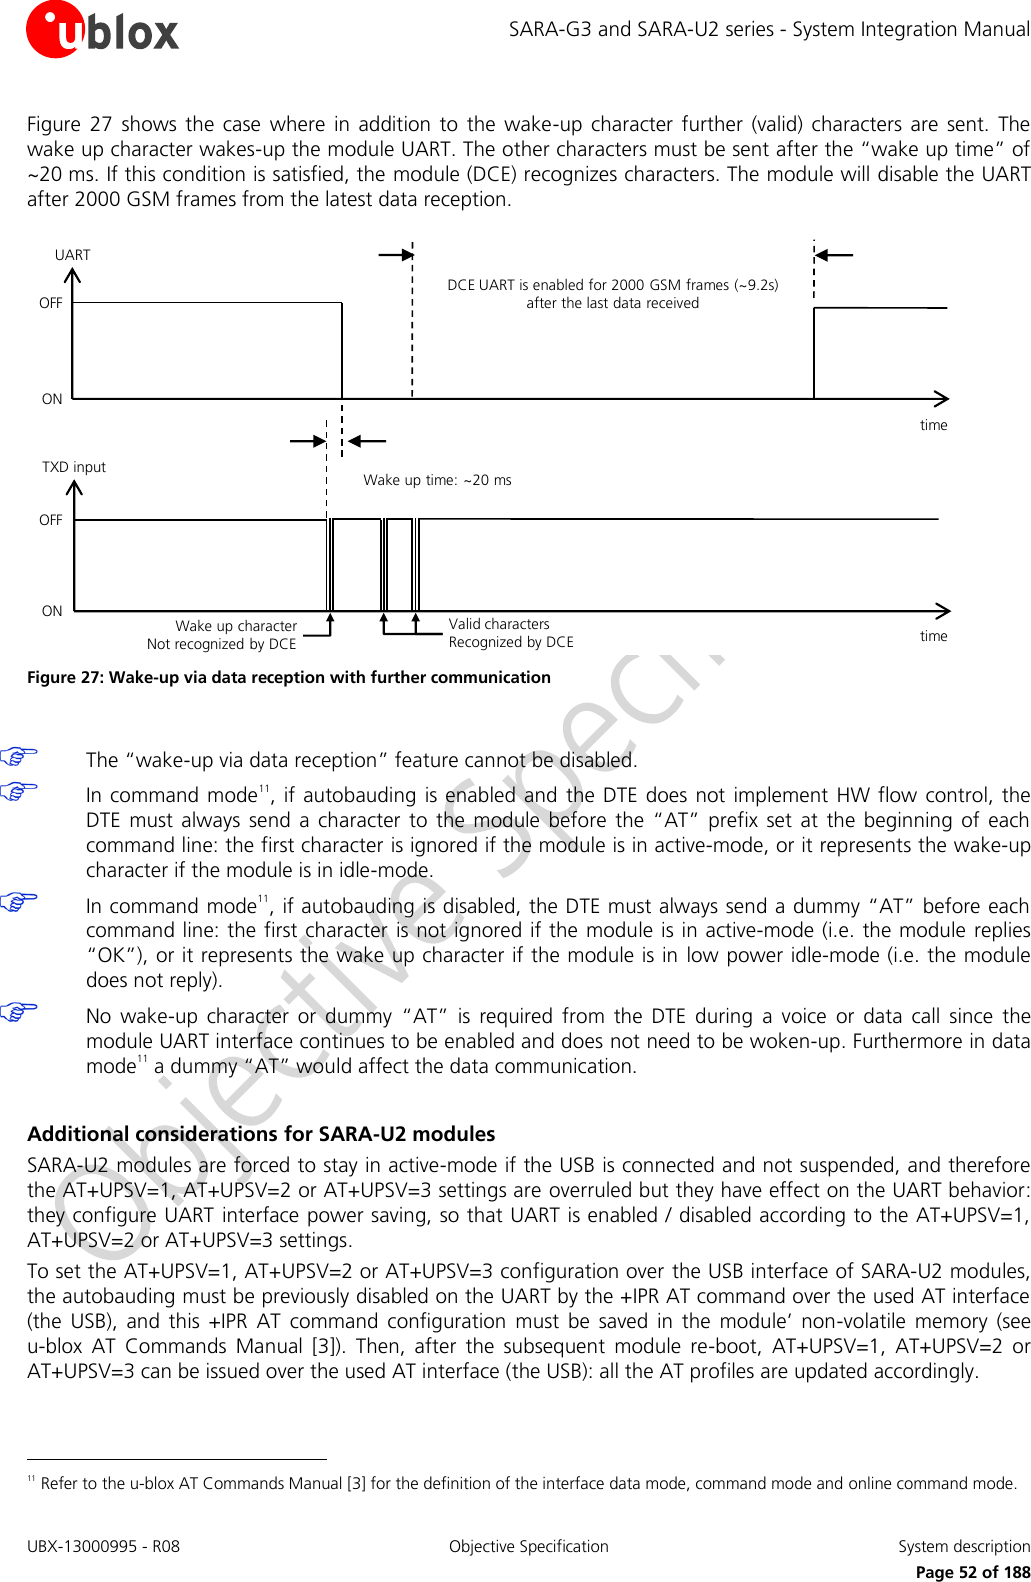 SARA-G3 and SARA-U2 series - System Integration Manual UBX-13000995 - R08  Objective Specification  System description     Page 52 of 188 Figure  27  shows  the  case  where  in  addition to  the  wake-up  character  further  (valid) characters  are  sent.  The wake up character wakes-up the module UART. The other characters must be sent after the “wake up time” of ~20 ms. If this condition is satisfied, the module (DCE) recognizes characters. The module will disable the UART after 2000 GSM frames from the latest data reception. DCE UART is enabled for 2000 GSM frames (~9.2s) after the last data receivedtime Wake up time: ~20 mstime Wake up character        Not recognized by DCEValid characters          Recognized by DCEOFFONTXD inputUARTOFFON Figure 27: Wake-up via data reception with further communication   The “wake-up via data reception” feature cannot be disabled.  In command  mode11, if autobauding  is enabled and  the DTE does  not implement  HW flow control, the DTE  must  always  send  a  character  to  the  module before  the  “AT”  prefix  set  at  the  beginning  of  each command line: the first character is ignored if the module is in active-mode, or it represents the wake-up character if the module is in idle-mode.  In command mode11, if autobauding is disabled, the DTE must always send a dummy “AT” before each command line: the first character  is not ignored if the module is in active-mode (i.e. the module  replies “OK”), or it represents the wake up character if the module is in  low power idle-mode (i.e. the module does not reply).  No  wake-up  character  or  dummy  “AT”  is  required  from  the  DTE  during  a  voice  or  data  call  since  the module UART interface continues to be enabled and does not need to be woken-up. Furthermore in data mode11 a dummy “AT” would affect the data communication.  Additional considerations for SARA-U2 modules SARA-U2 modules are forced to stay in active-mode if the USB is connected and not suspended, and therefore the AT+UPSV=1, AT+UPSV=2 or AT+UPSV=3 settings are overruled but they have effect on the UART behavior: they configure UART  interface power saving, so that UART is enabled / disabled according to the AT+UPSV=1, AT+UPSV=2 or AT+UPSV=3 settings. To set the AT+UPSV=1, AT+UPSV=2 or AT+UPSV=3 configuration over the USB interface of SARA-U2 modules, the autobauding must be previously disabled on the UART by the +IPR AT command over the used AT interface (the  USB),  and  this  +IPR  AT  command  configuration  must  be  saved  in  the  module’  non-volatile  memory  (see u-blox  AT  Commands  Manual  [3]).  Then,  after  the  subsequent  module  re-boot,  AT+UPSV=1,  AT+UPSV=2  or AT+UPSV=3 can be issued over the used AT interface (the USB): all the AT profiles are updated accordingly.                                                        11 Refer to the u-blox AT Commands Manual [3] for the definition of the interface data mode, command mode and online command mode. 